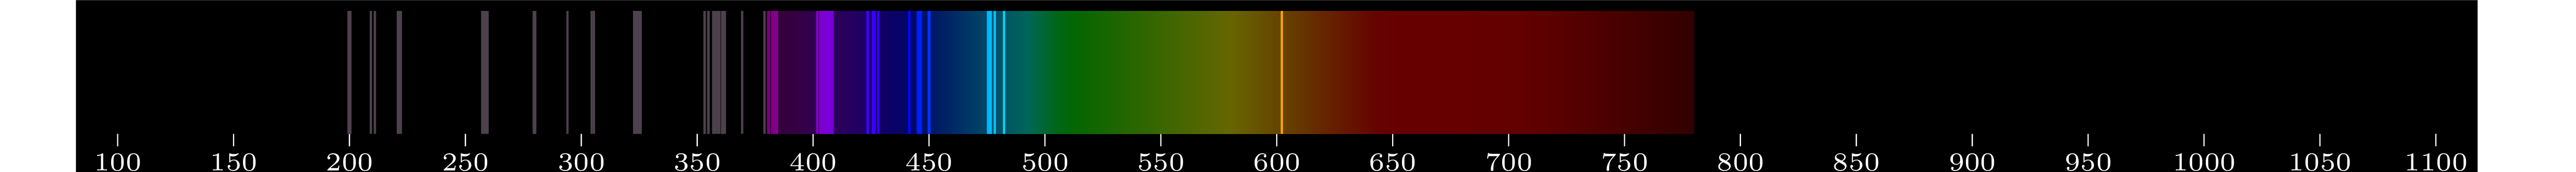 emmision spectra of element Mn